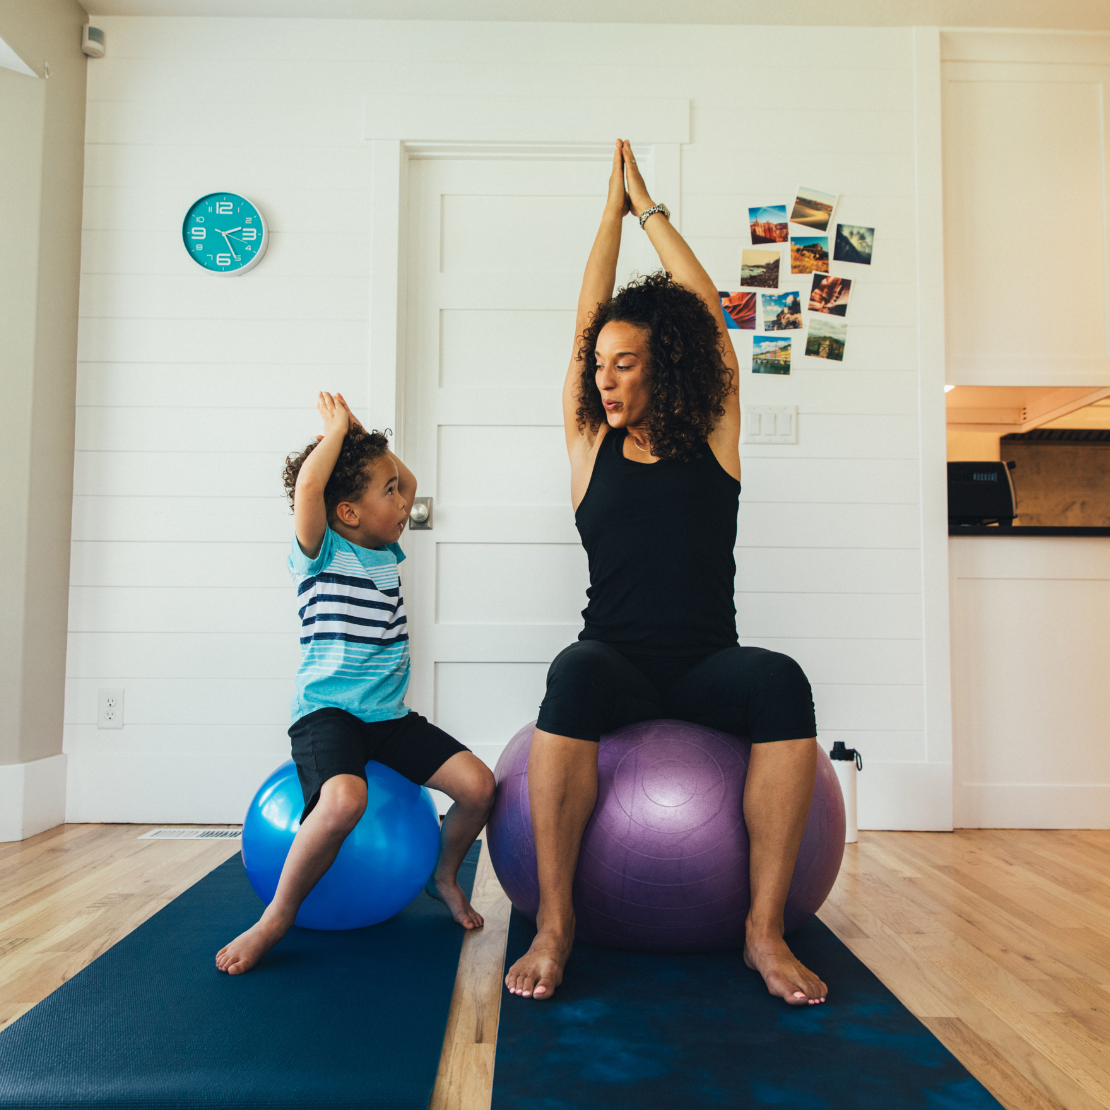 Reduce burnout through these exercise tips for busy working moms